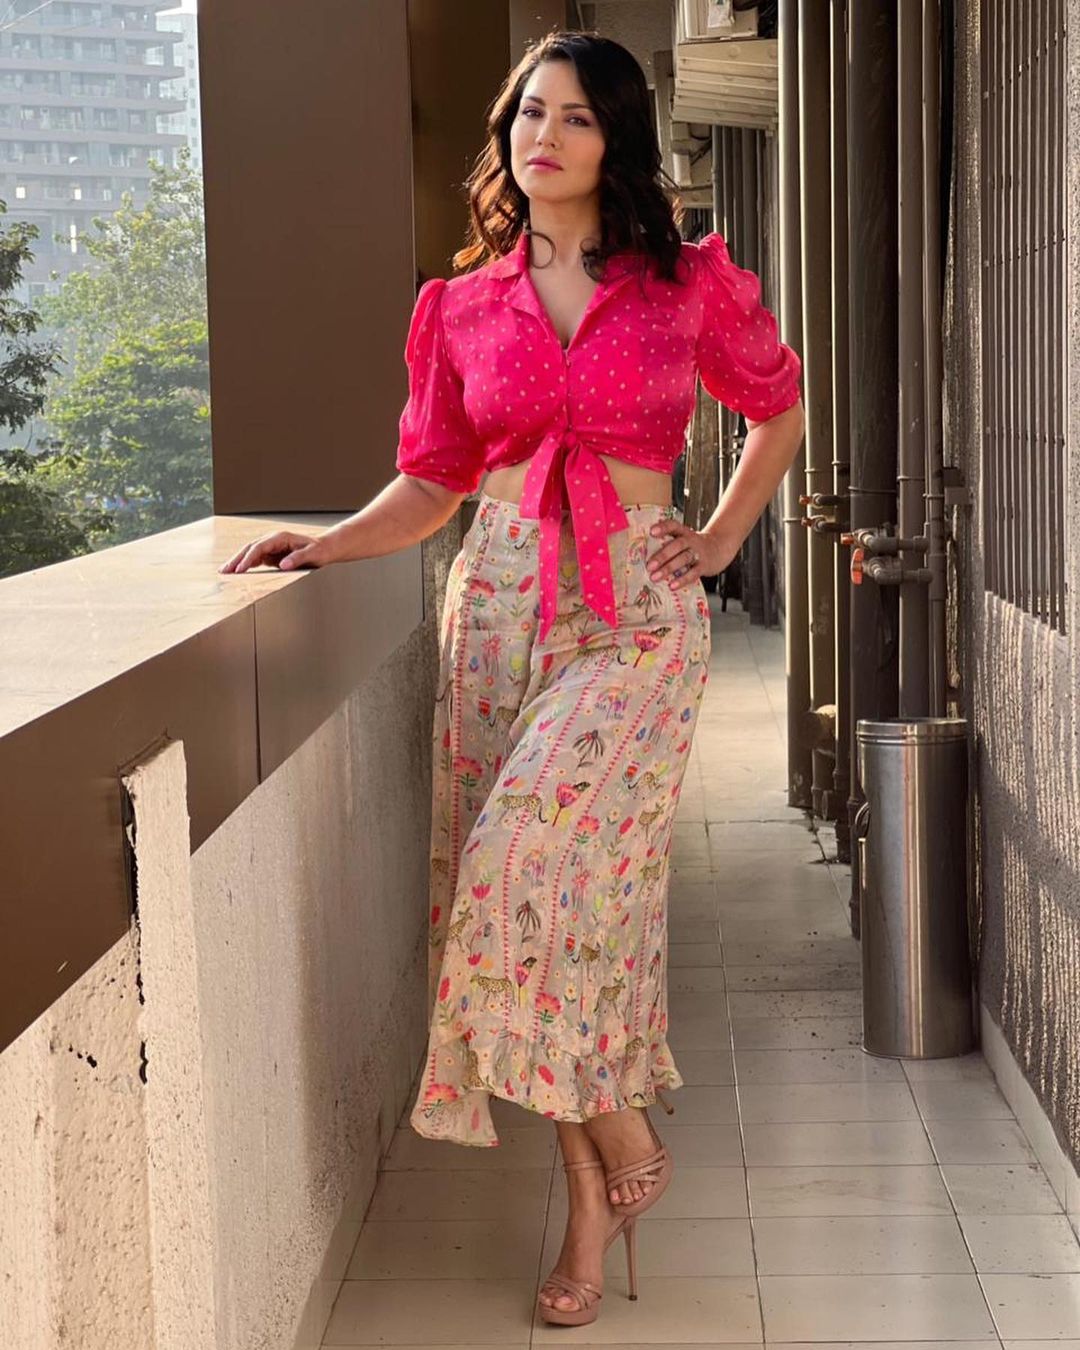 Sunny Leone looks stunning in the crop top and floral midi skirt